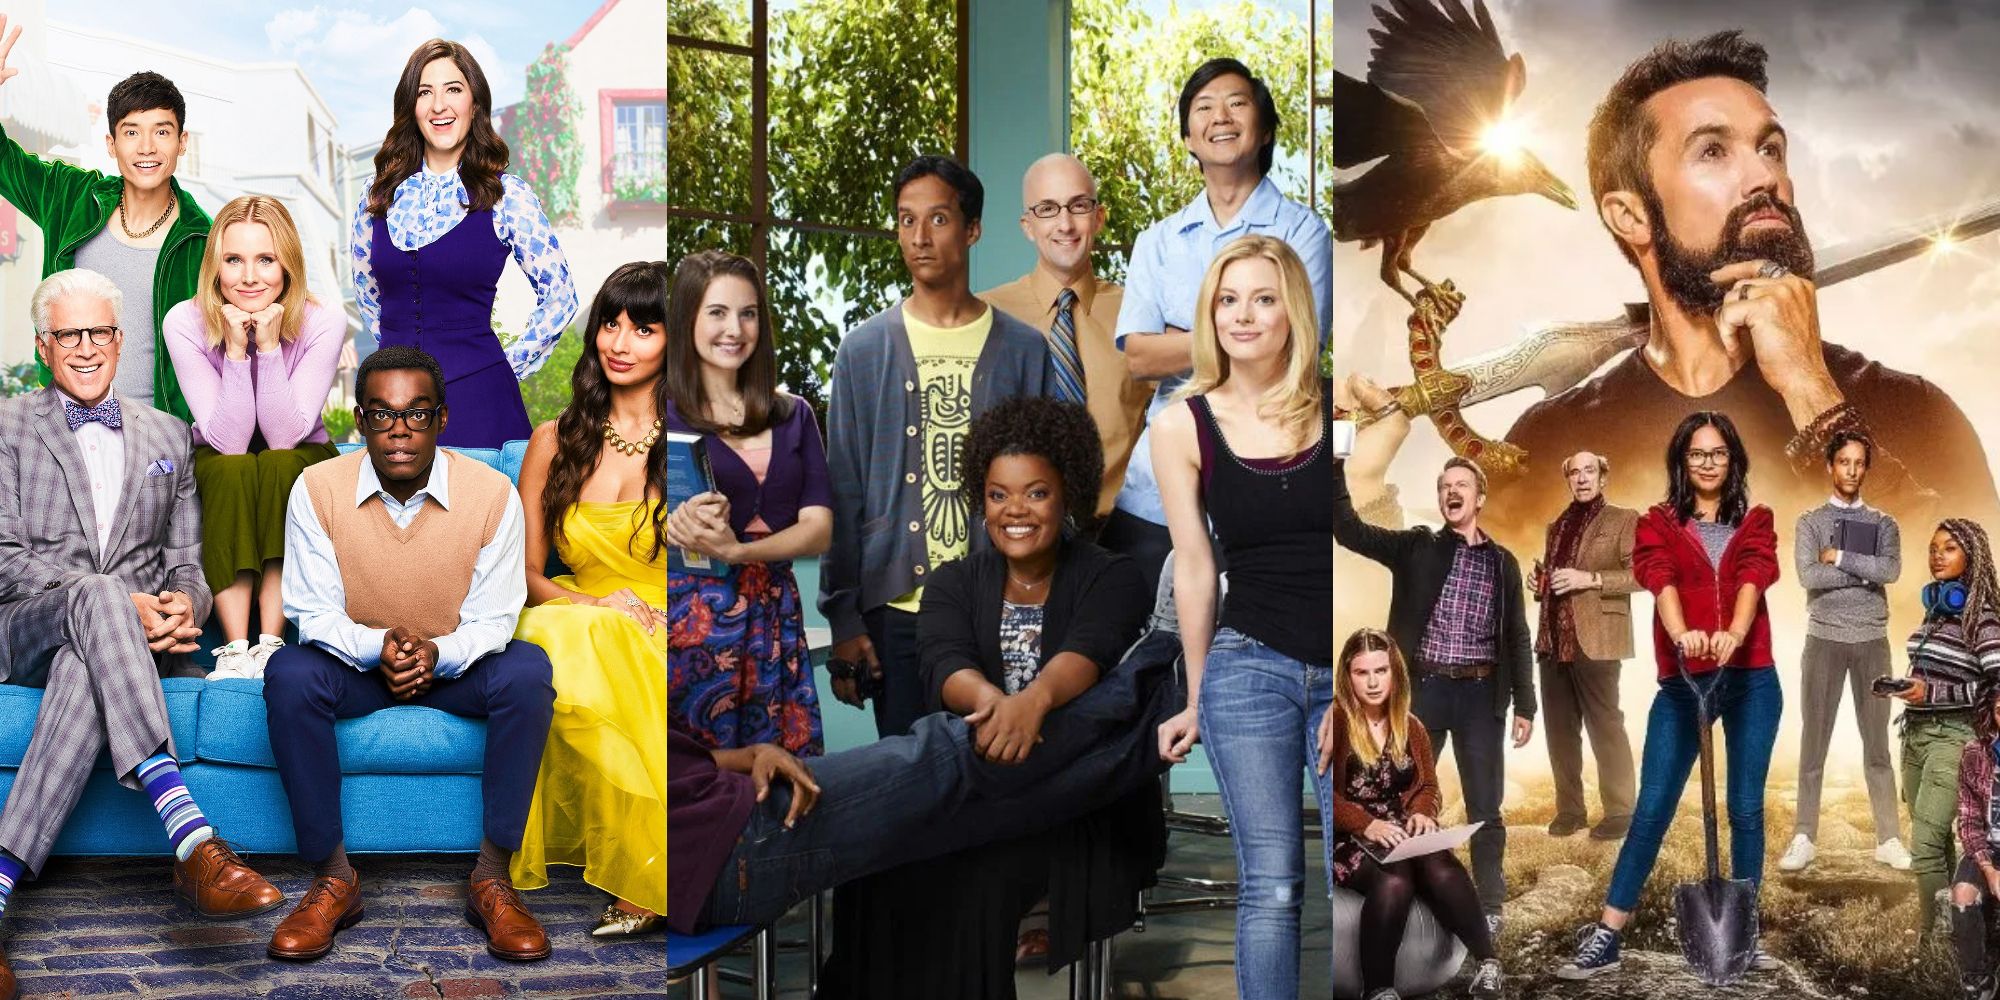 The cast of The Good Place, Community, and Mythic Quest